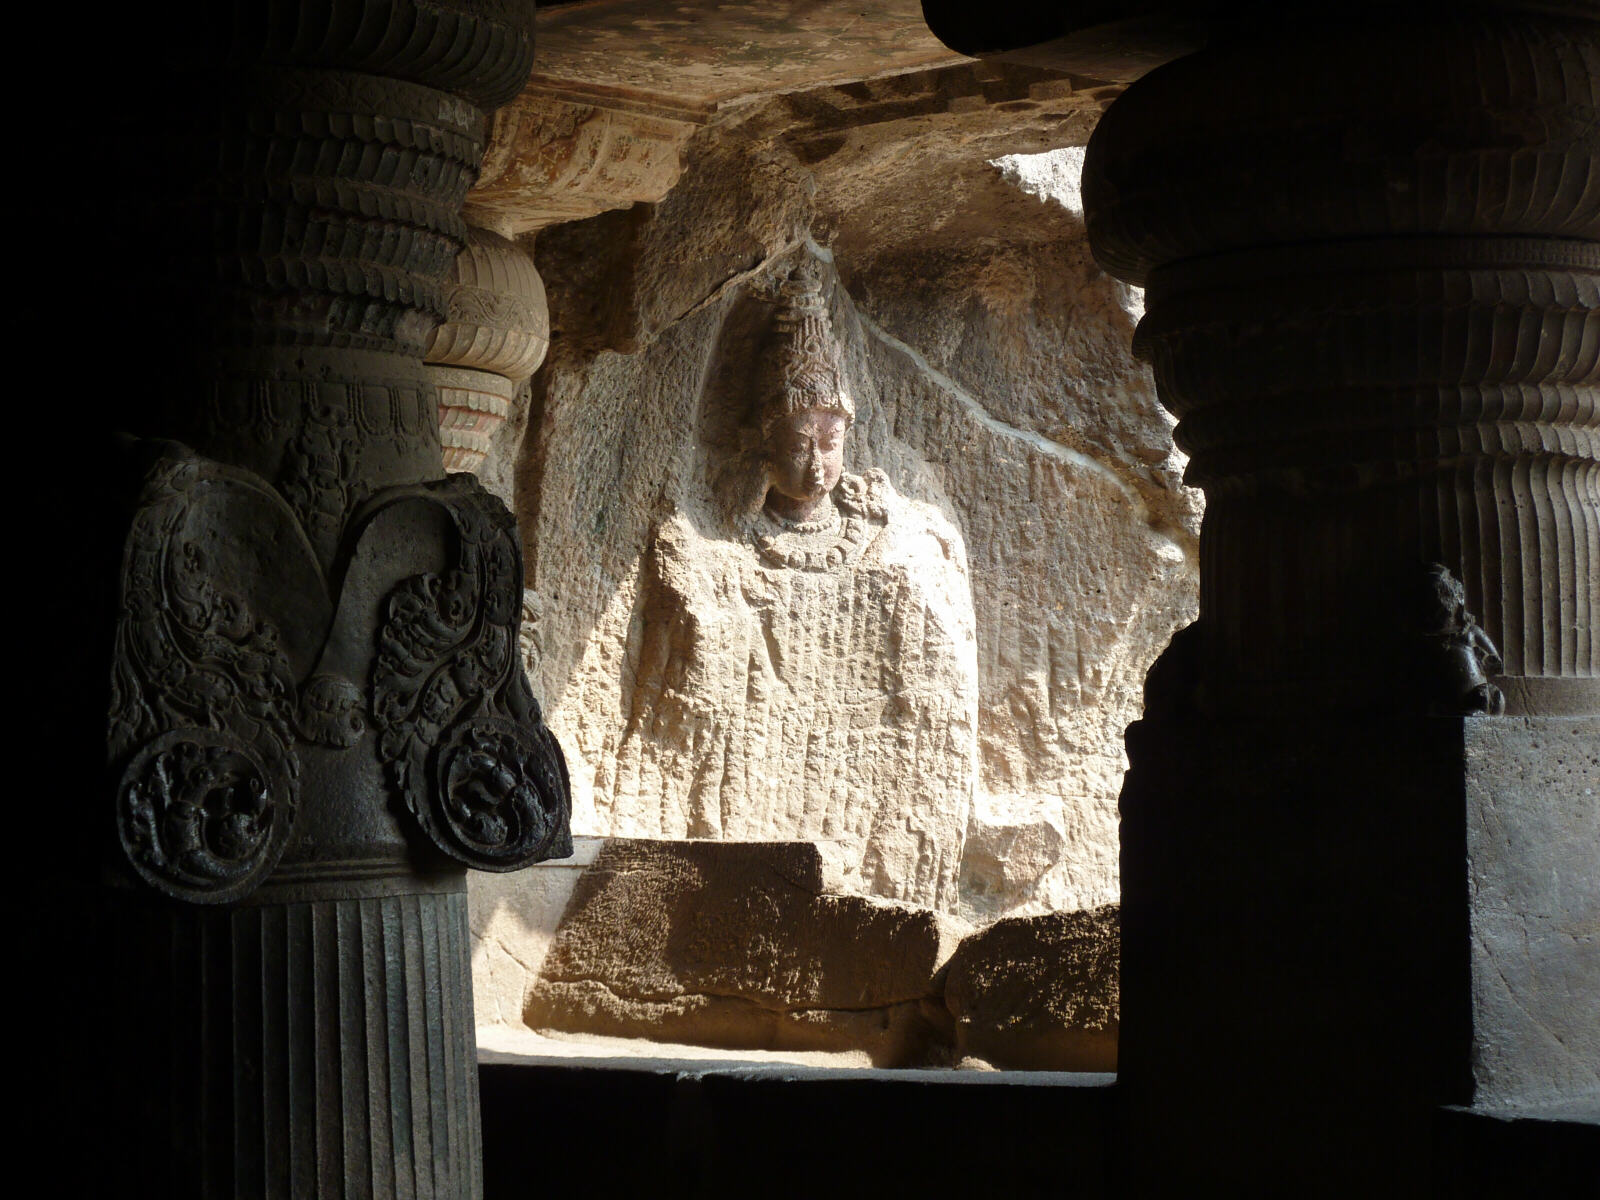 An unfinished carving in a Jain temple at Ellora, India